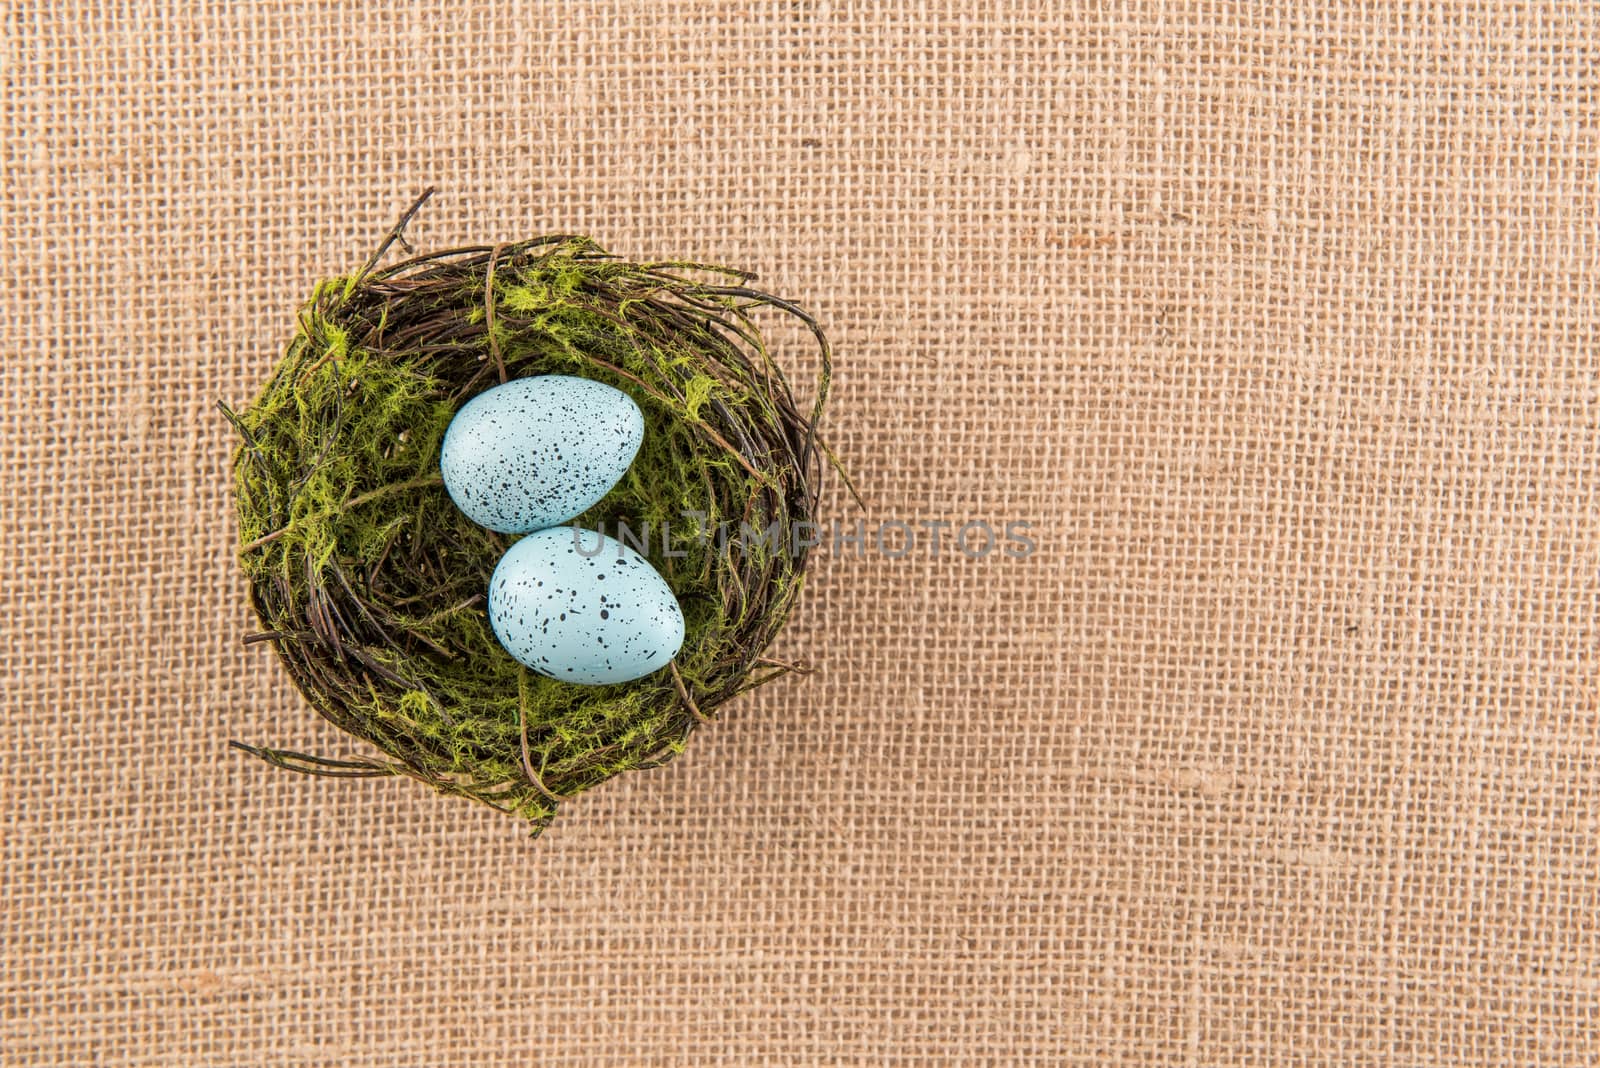 Two blue speckled eggs in mossy nest, on burlap background